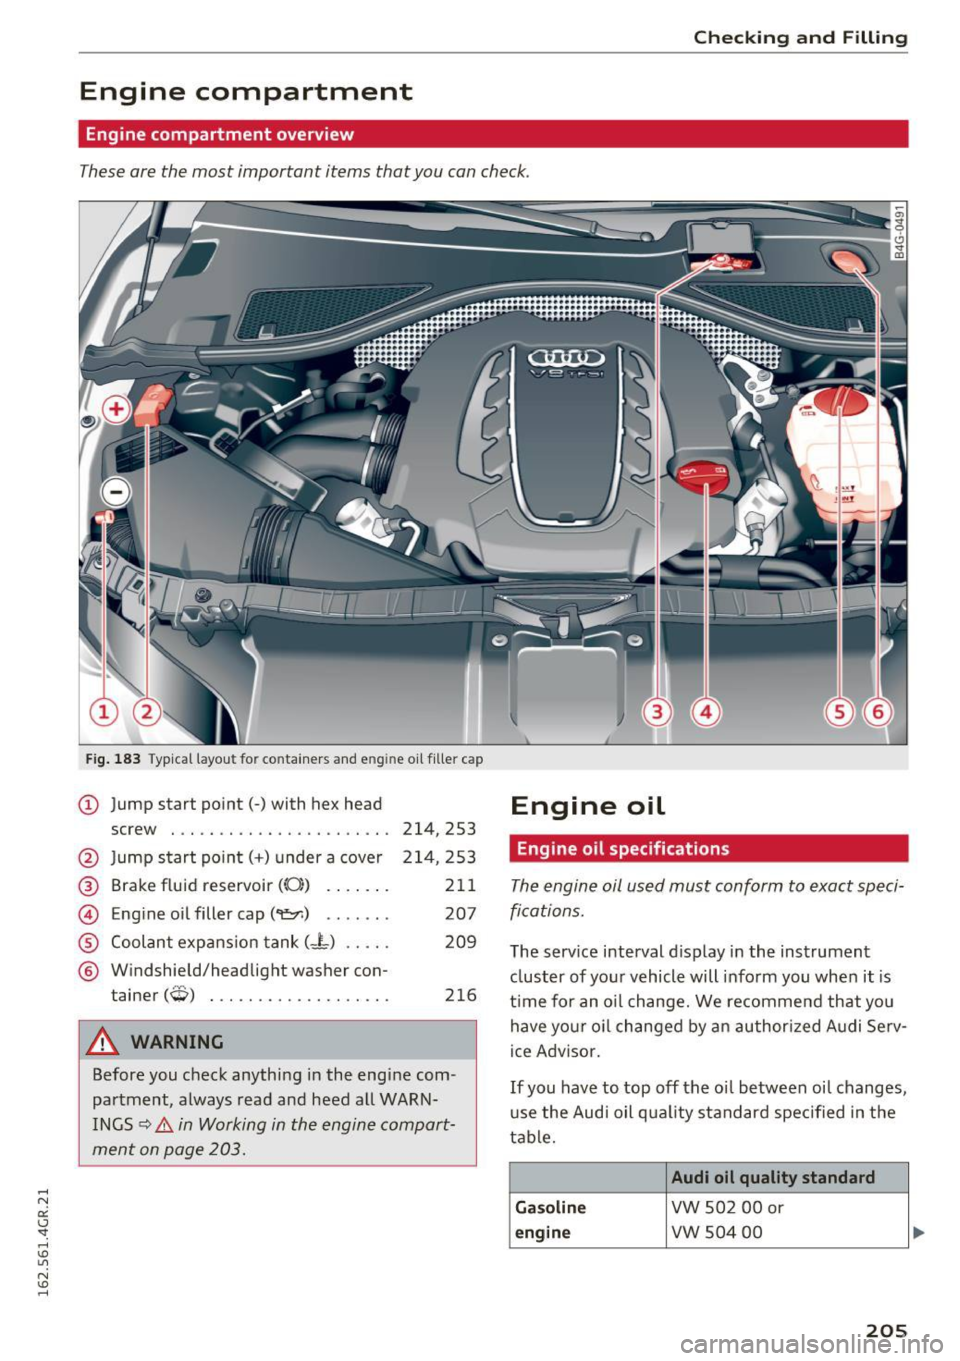 AUDI RS7 SPORTBACK 2016  Owners Manual Checking  and Filling 
Engine  compartment 
Engine  compartment  overview 
These are the  most  important  items  that you  can check. 
Fig. 183 Typical layout for  containers and e ngine oil fille r 